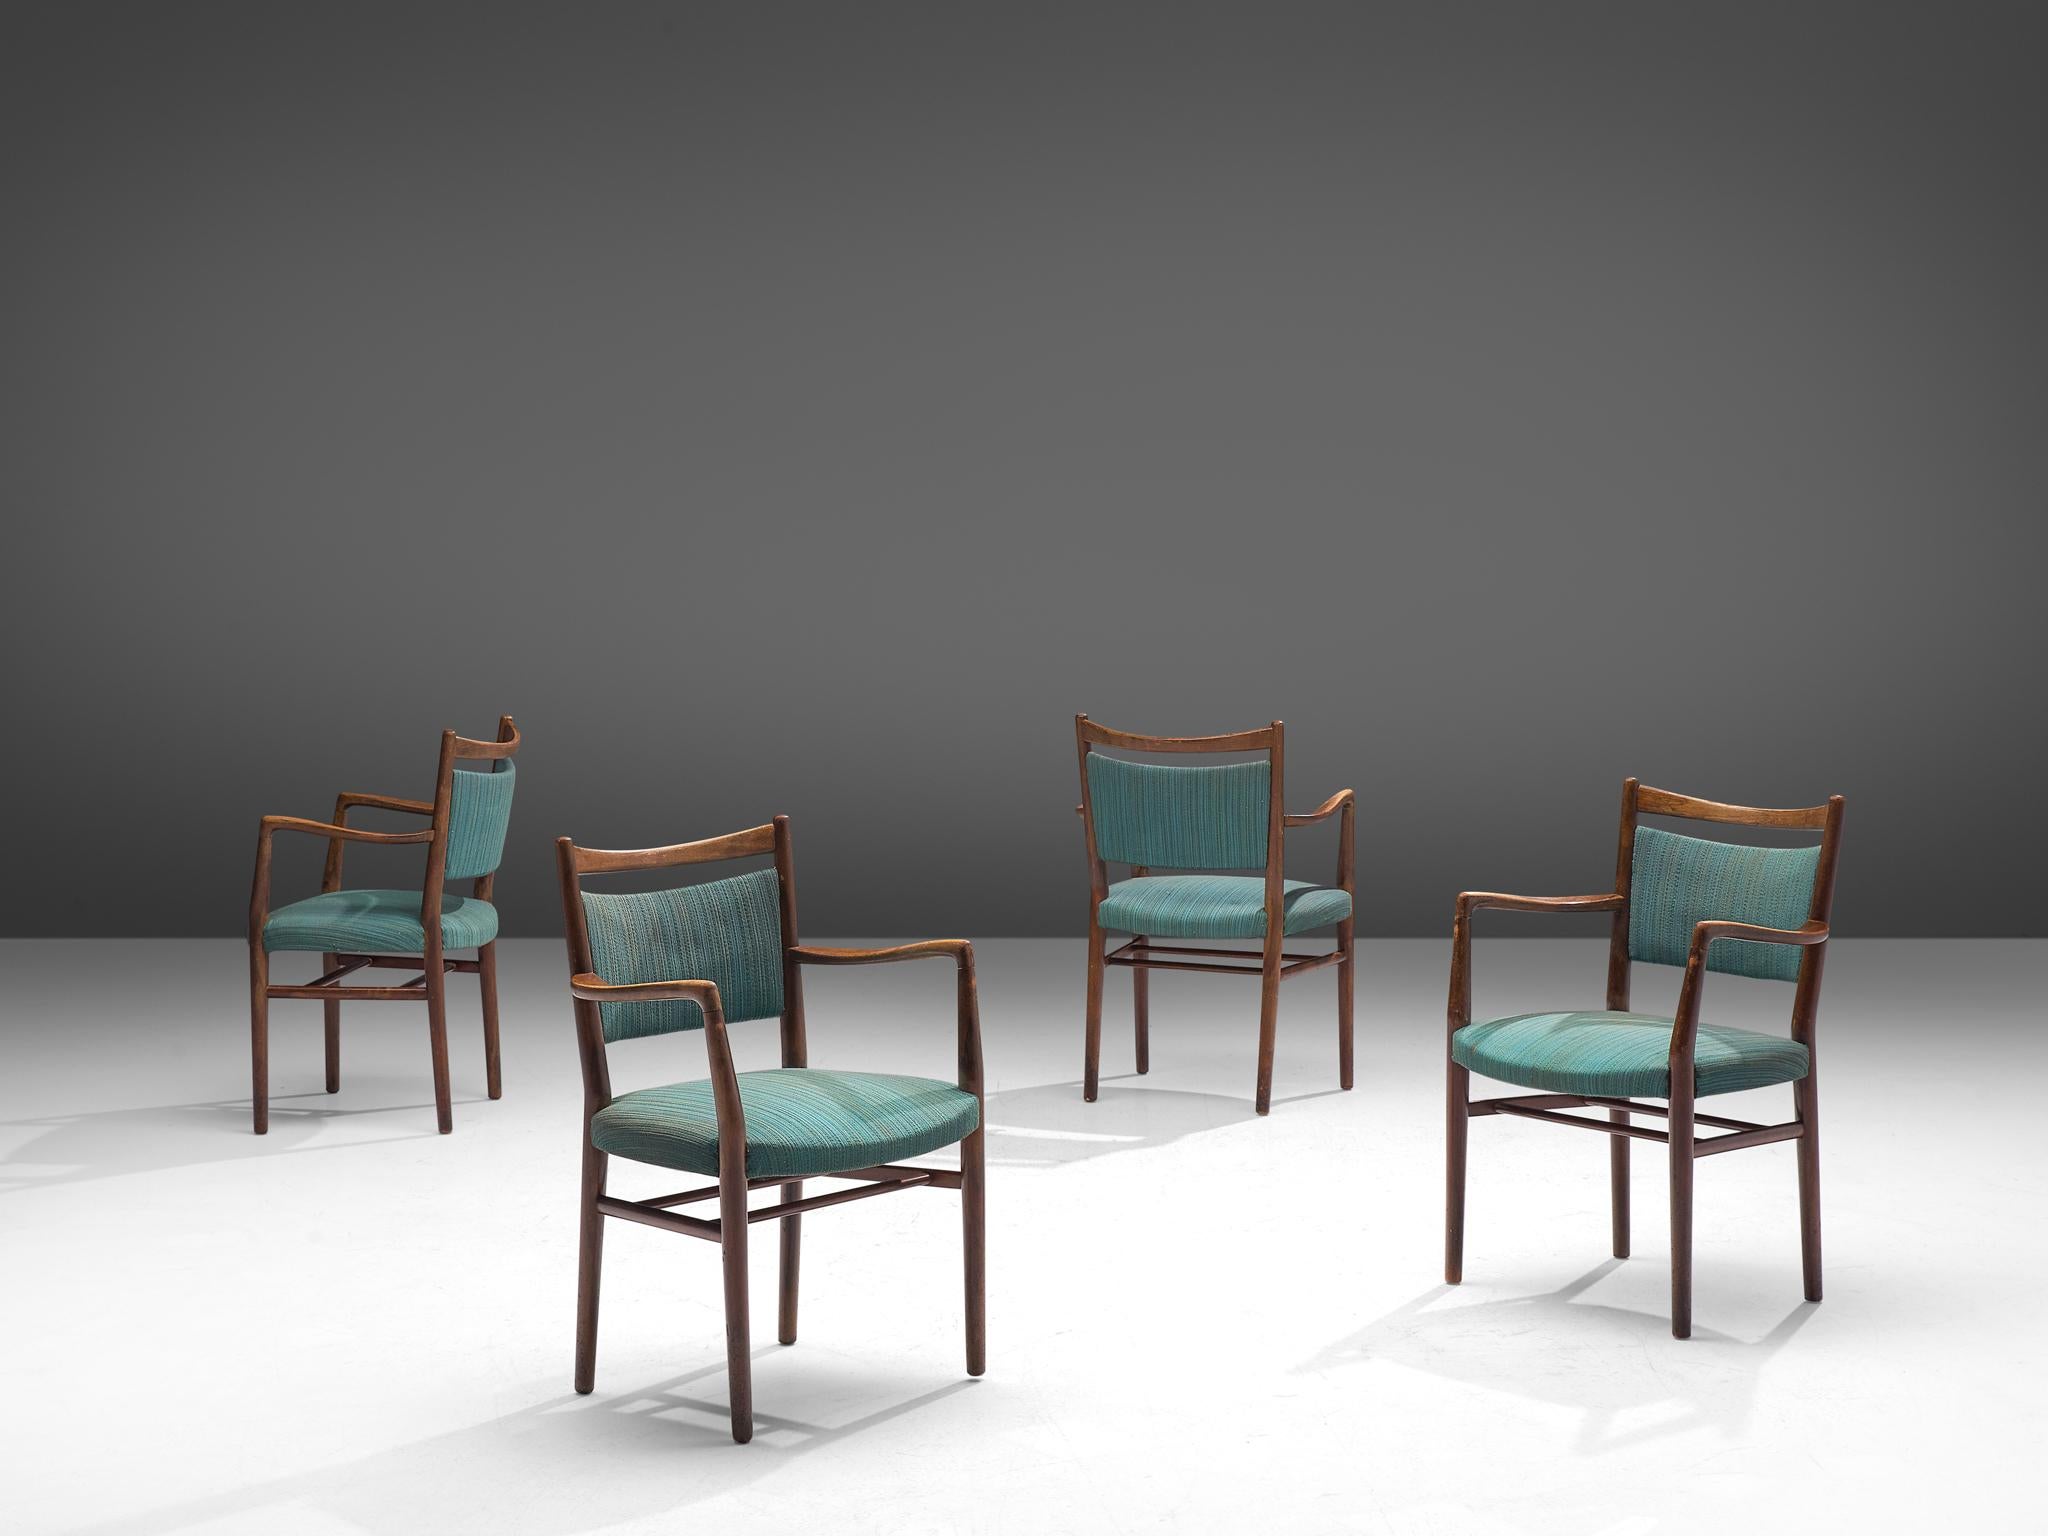 Large Set of Fourteen Danish Armchairs with Turquois Upholstery (Stoff)